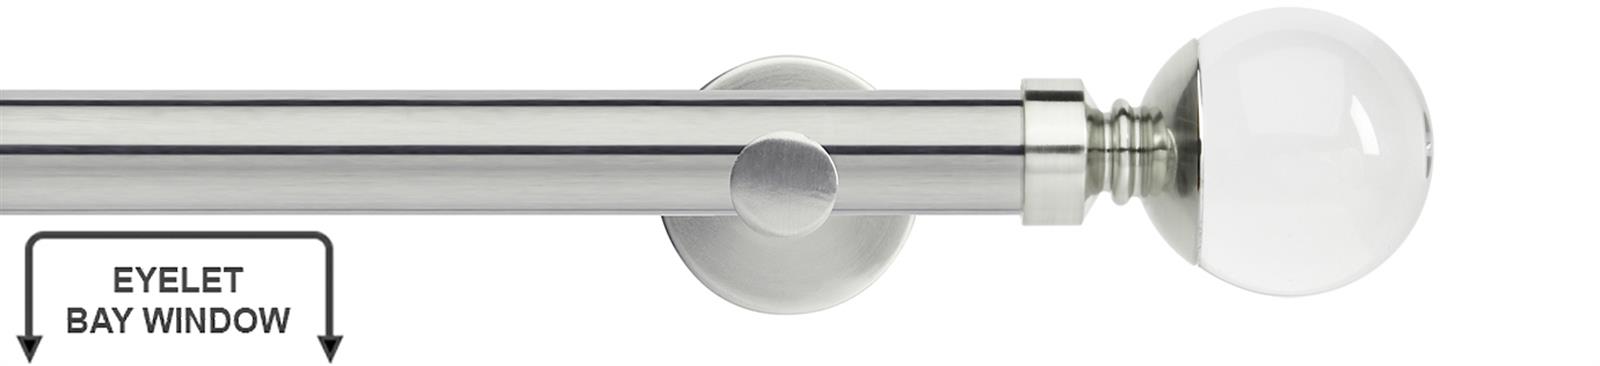 Neo Premium 28mm Eyelet Bay Window Pole Stainless Steel Clear Ball